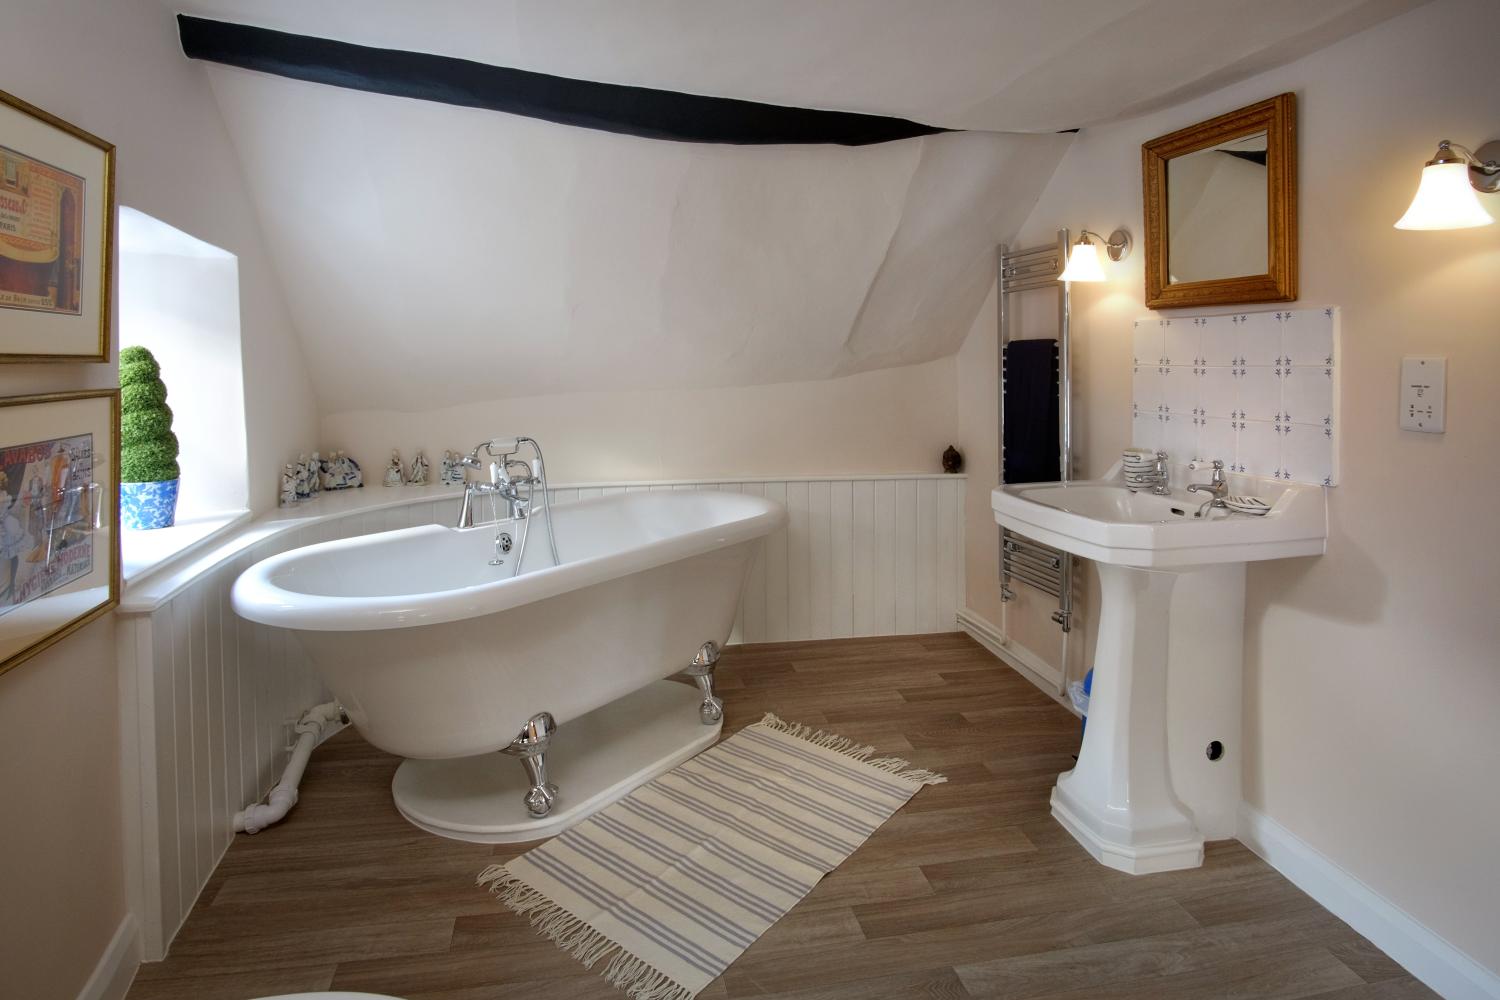 Marshmallow en-suite has a roll top bath (and low head height)